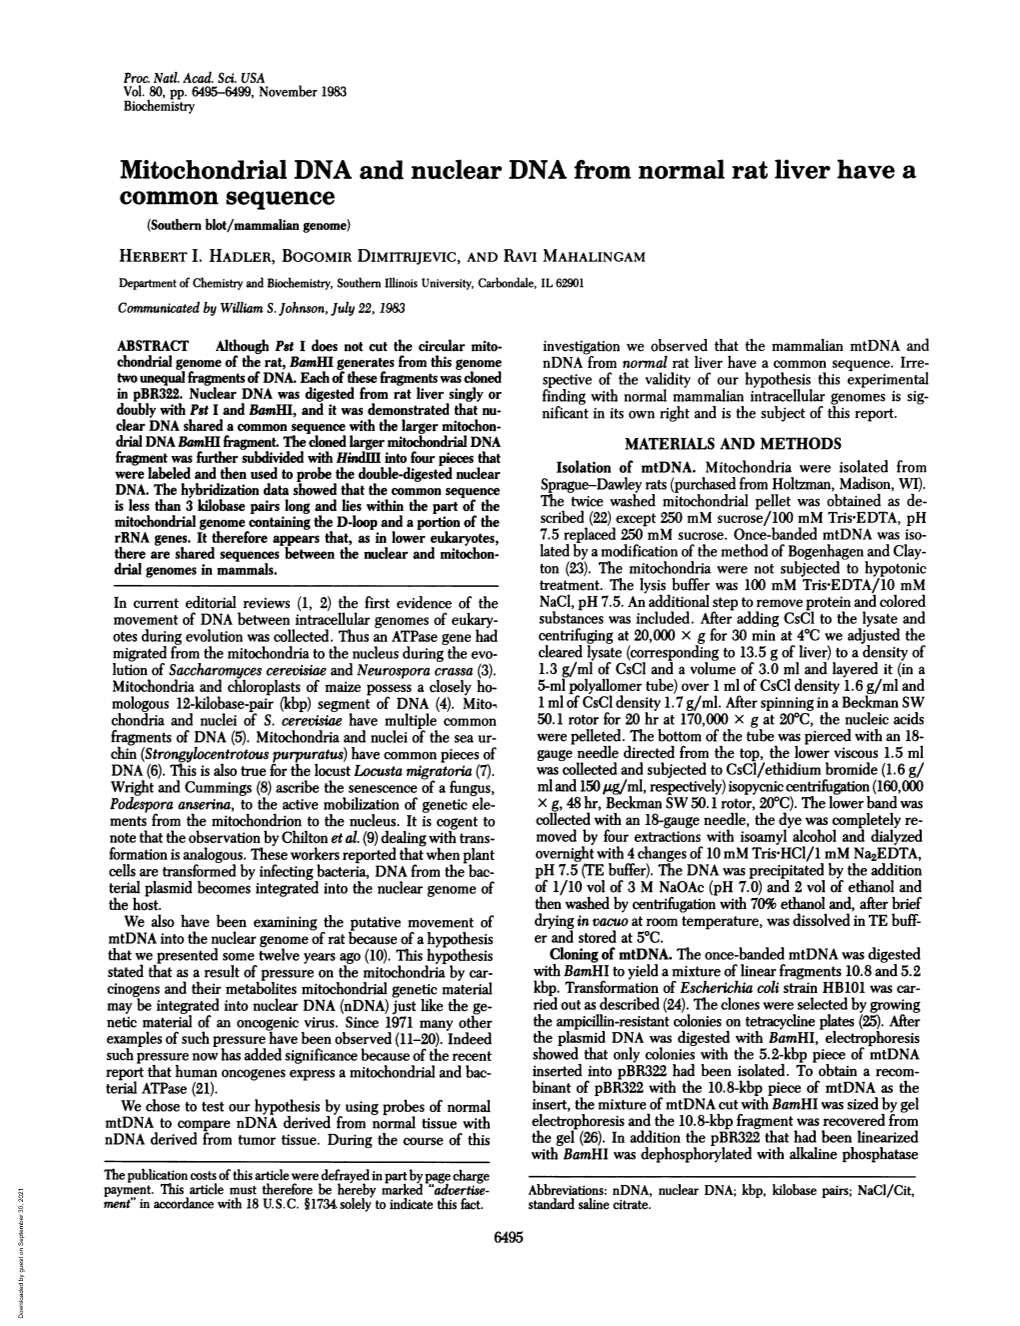 Mitochondrial DNA and Nuclear DNA from Normal Rat Liver Have a Common Sequence (Southern Blot/Mammalian Genome) HERBERT I